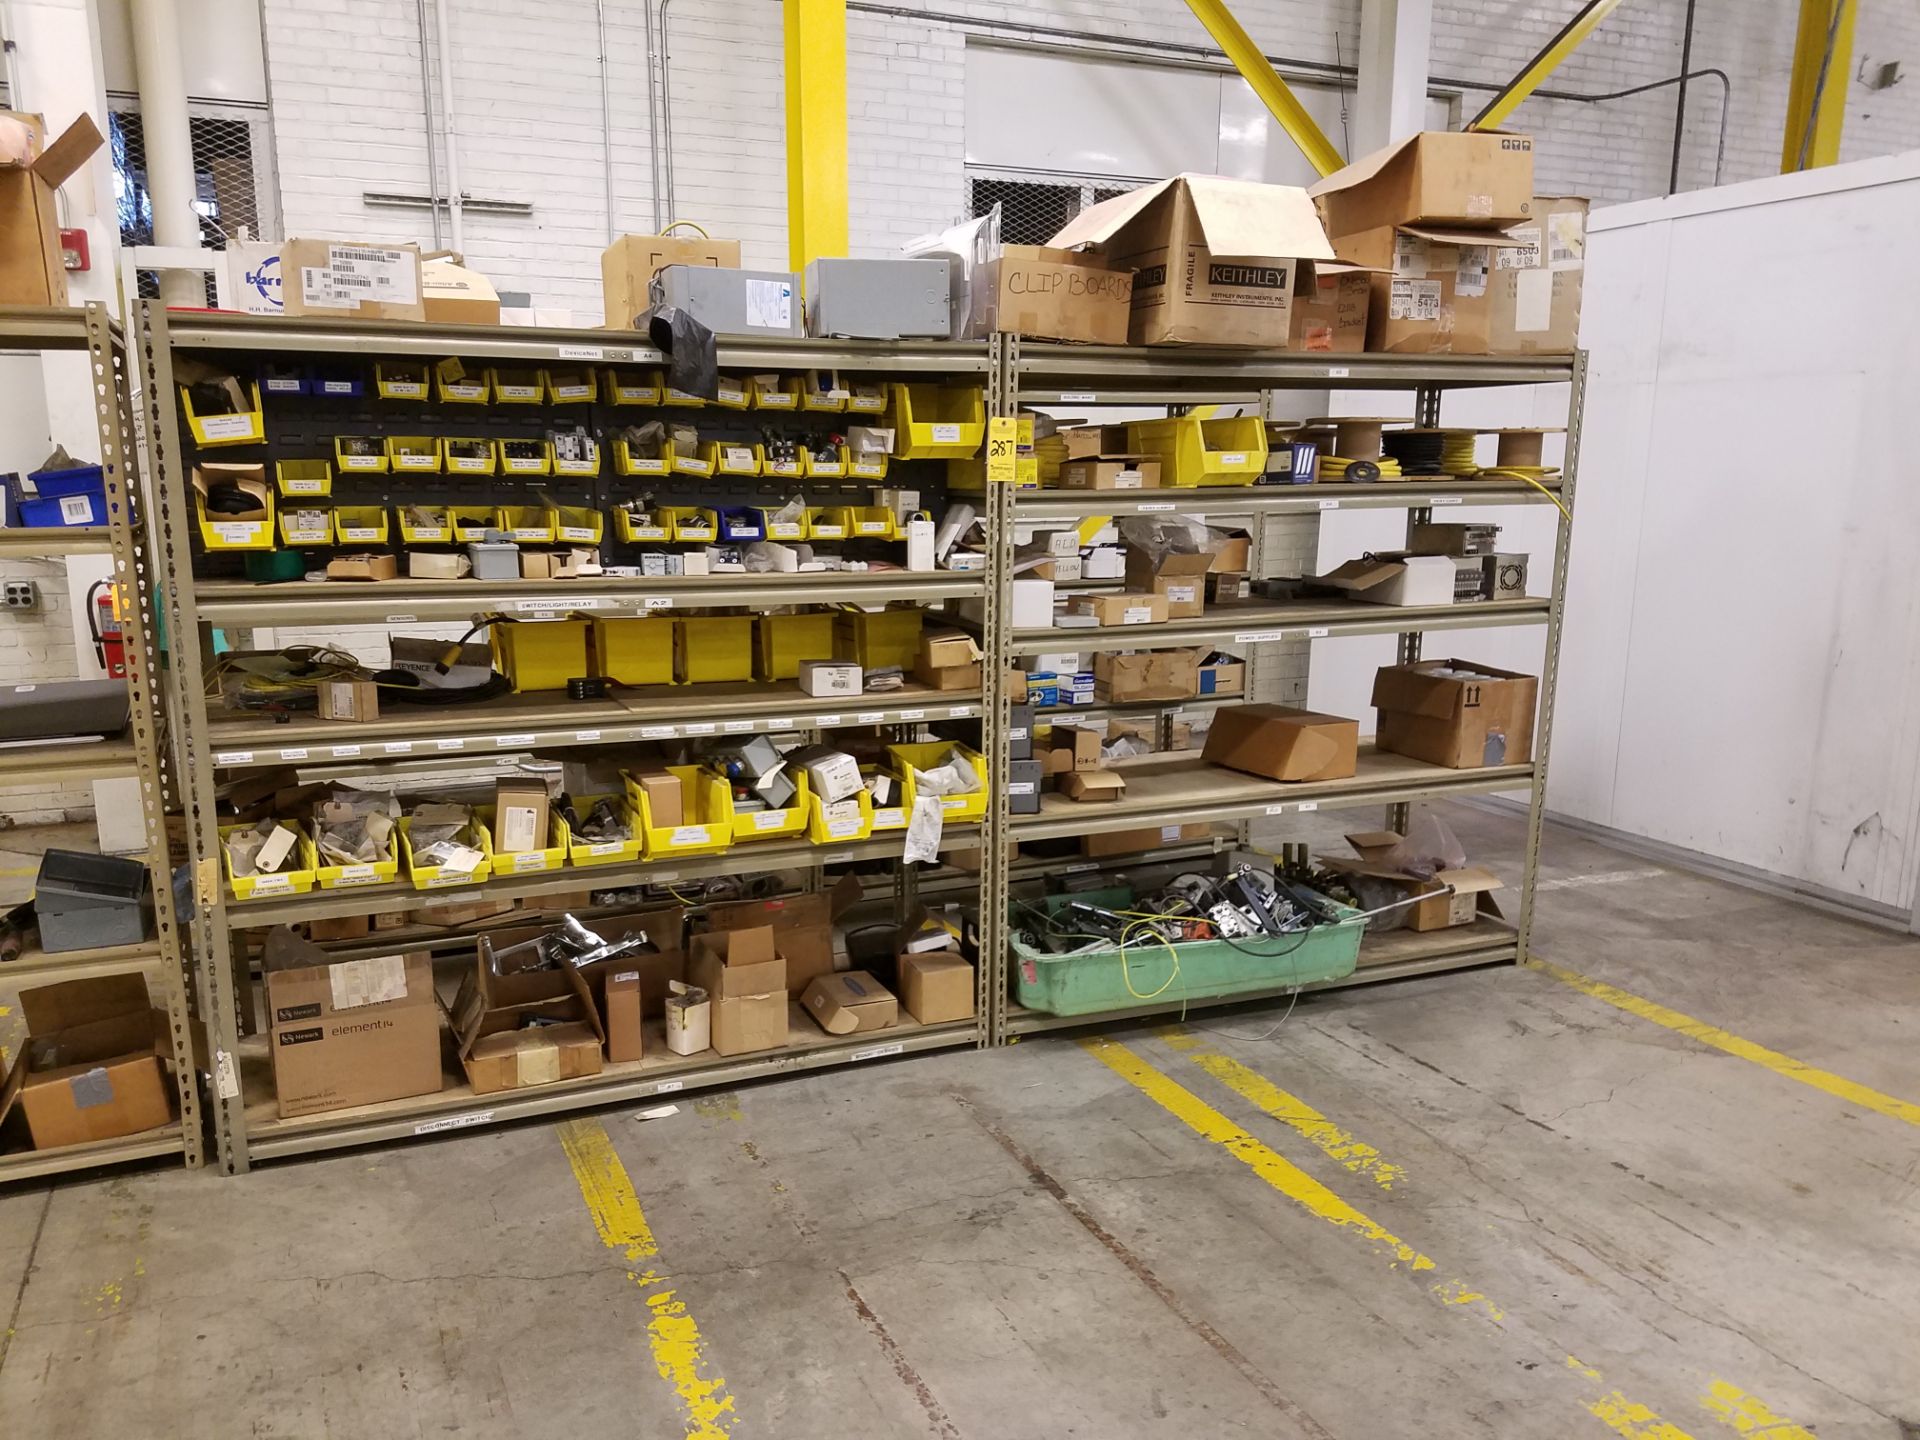 (2) Storage Shelves and Contents in Maintenance Area